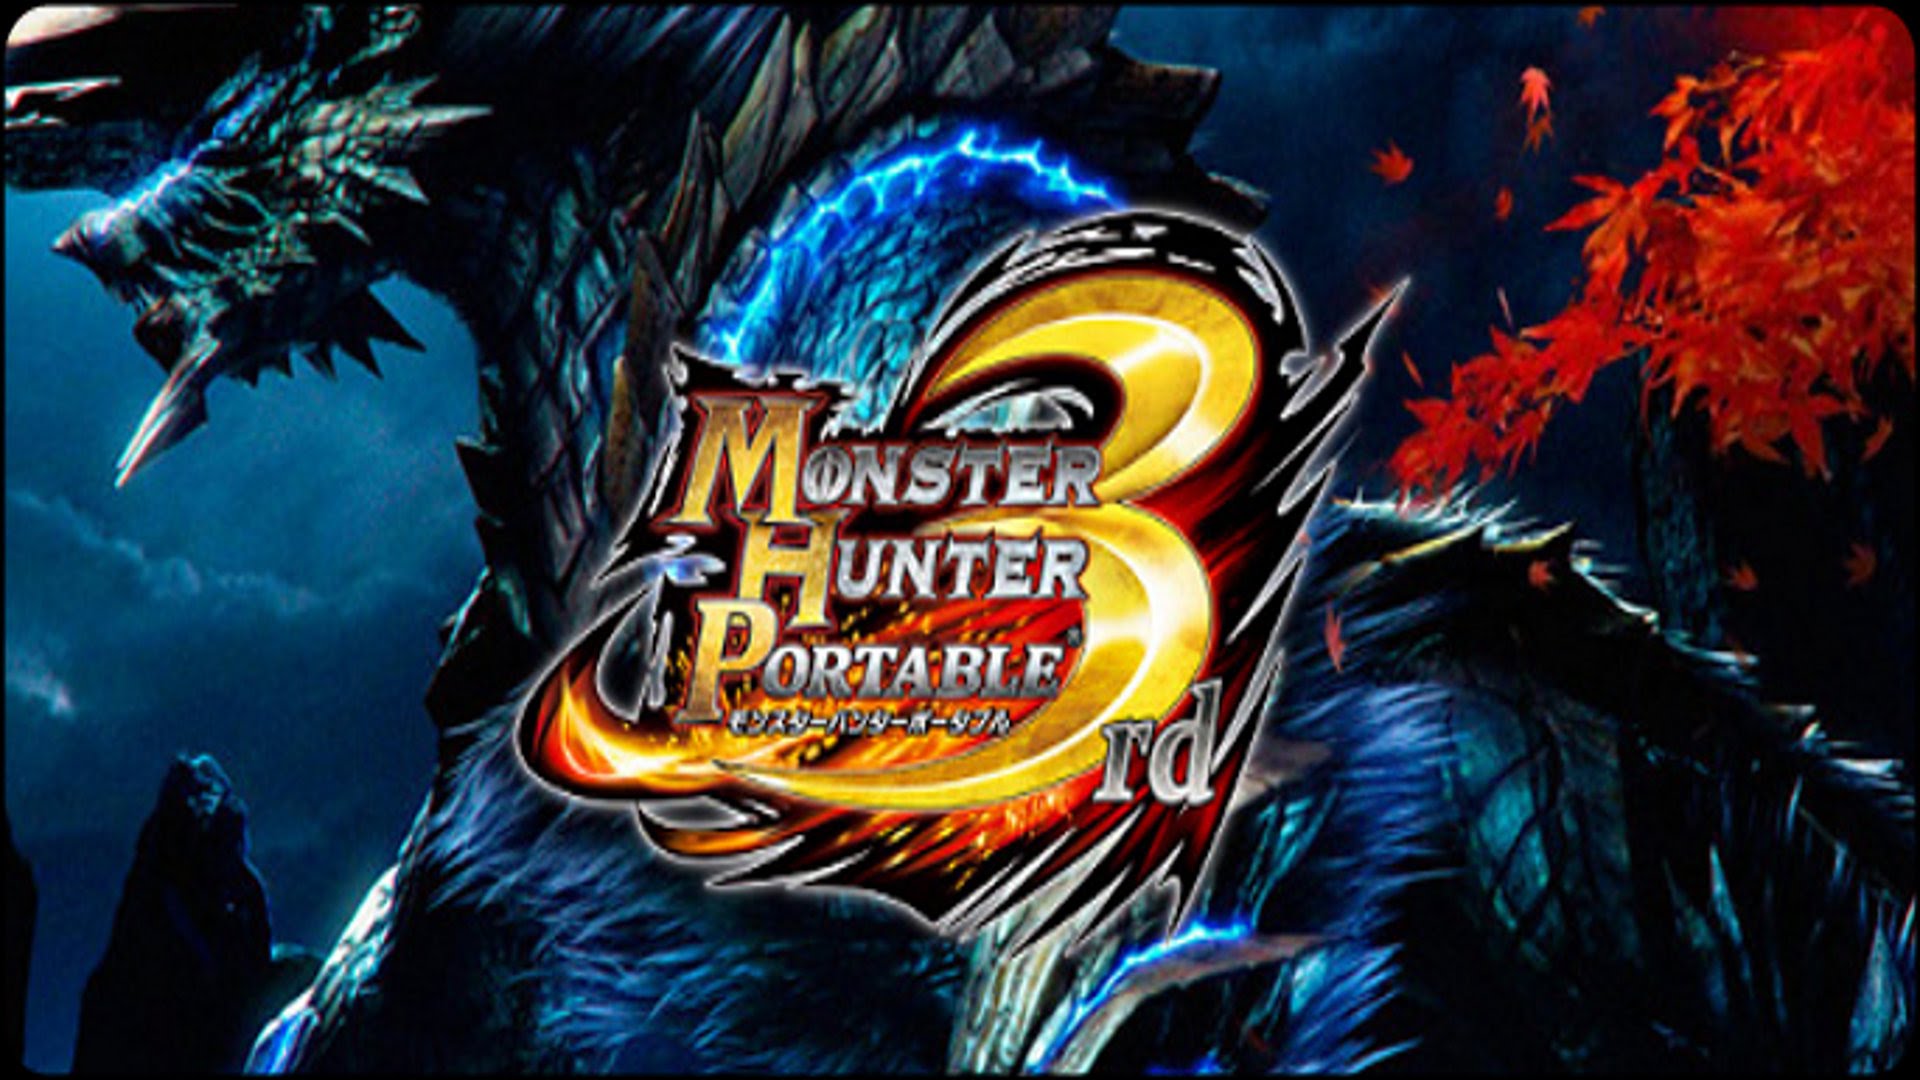 HD Quality Wallpaper | Collection: Video Game, 1920x1080 Monster Hunter Portable 3rd